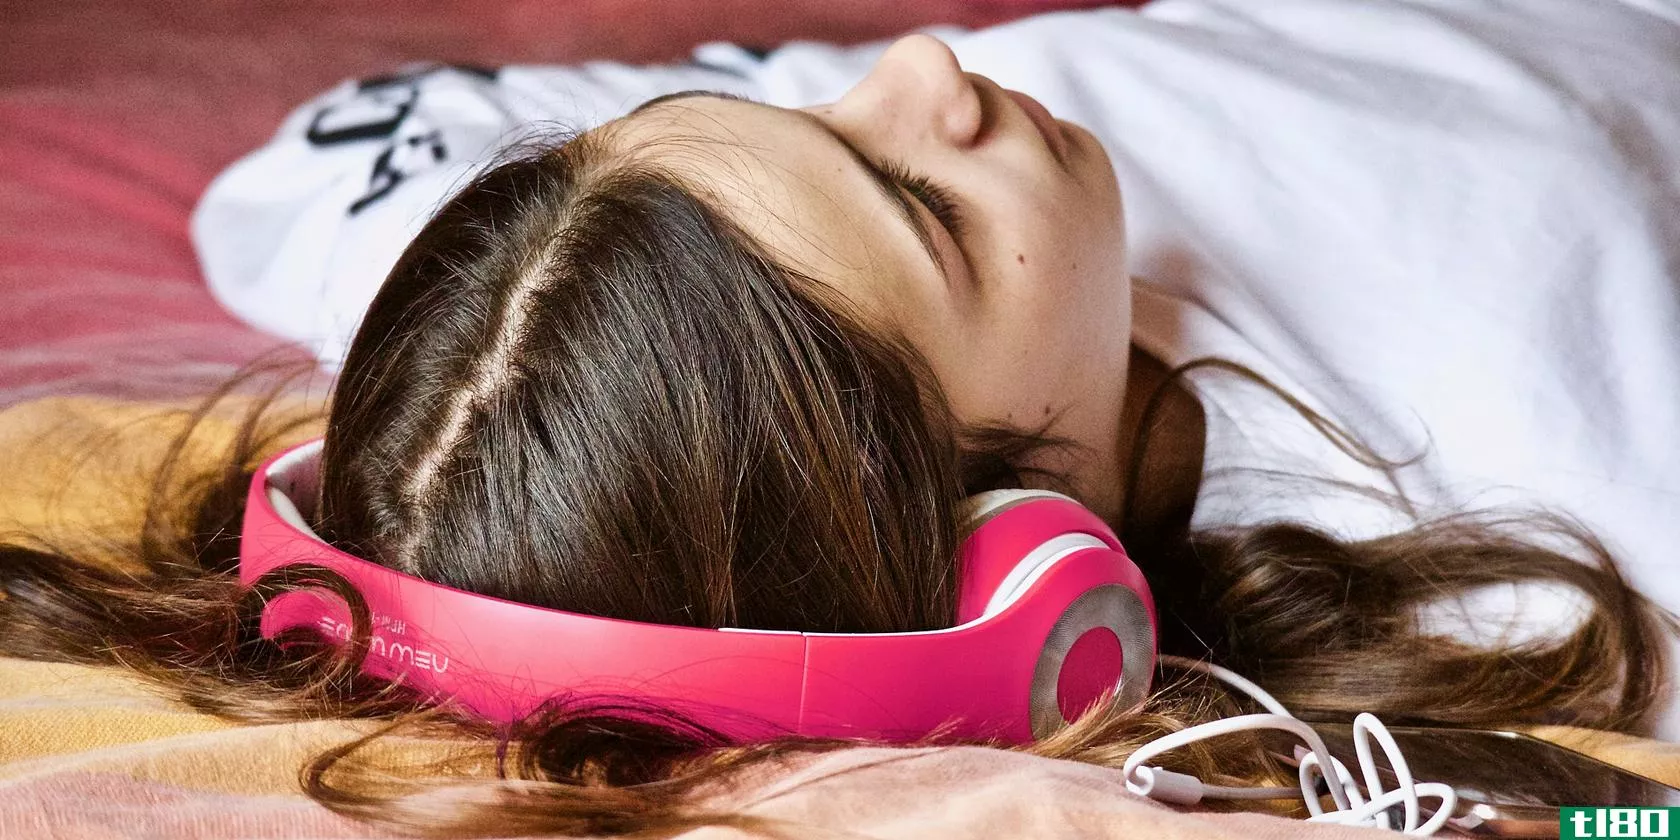 Girl laying on her back and wearing pink headphones